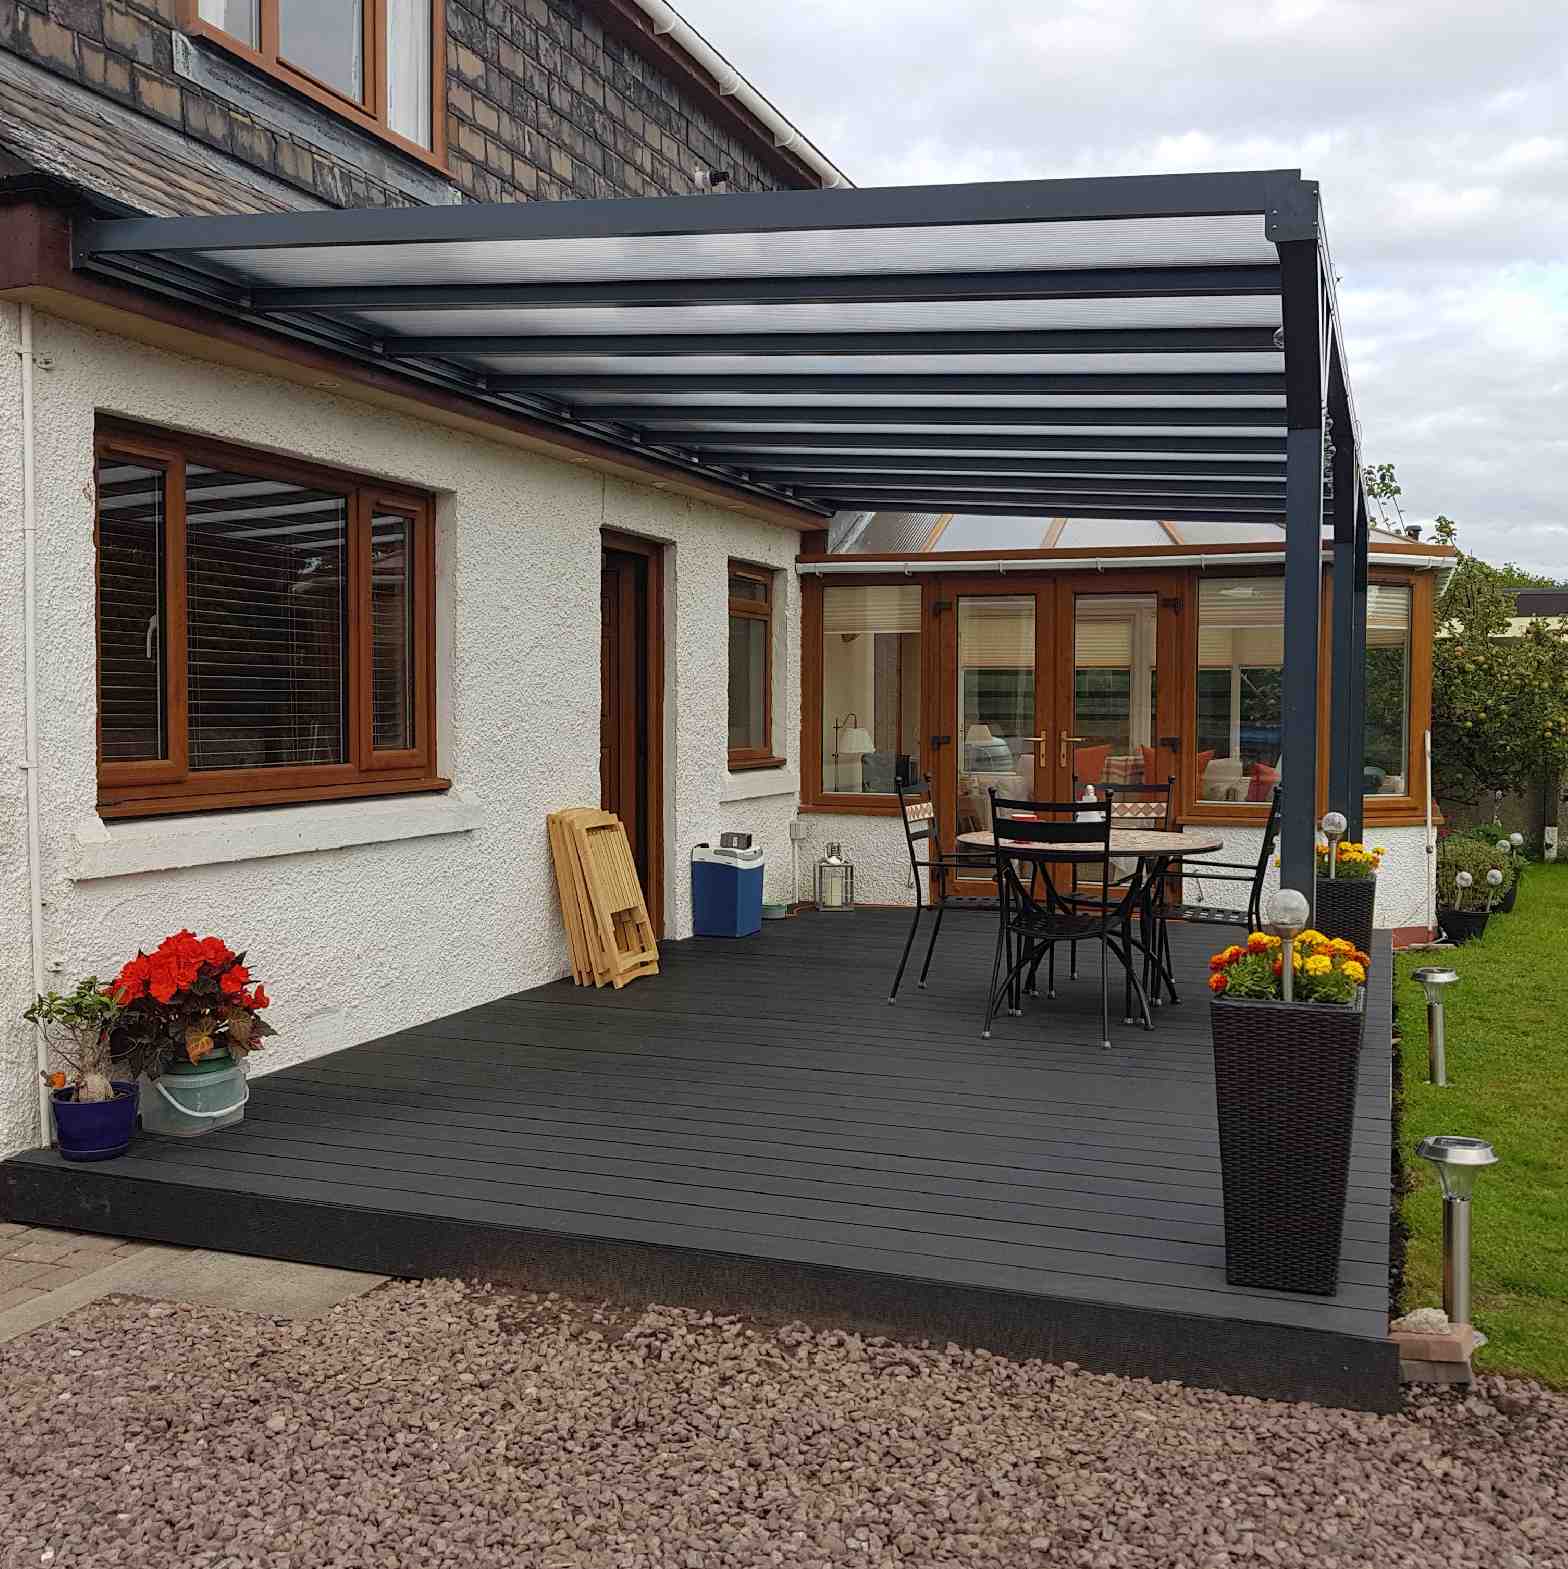 Buy Omega Verandah, Anthracite Grey, 16mm Polycarbonate Glazing - 9.6m (W) x 4.5m (P), (5) Supporting Posts online today